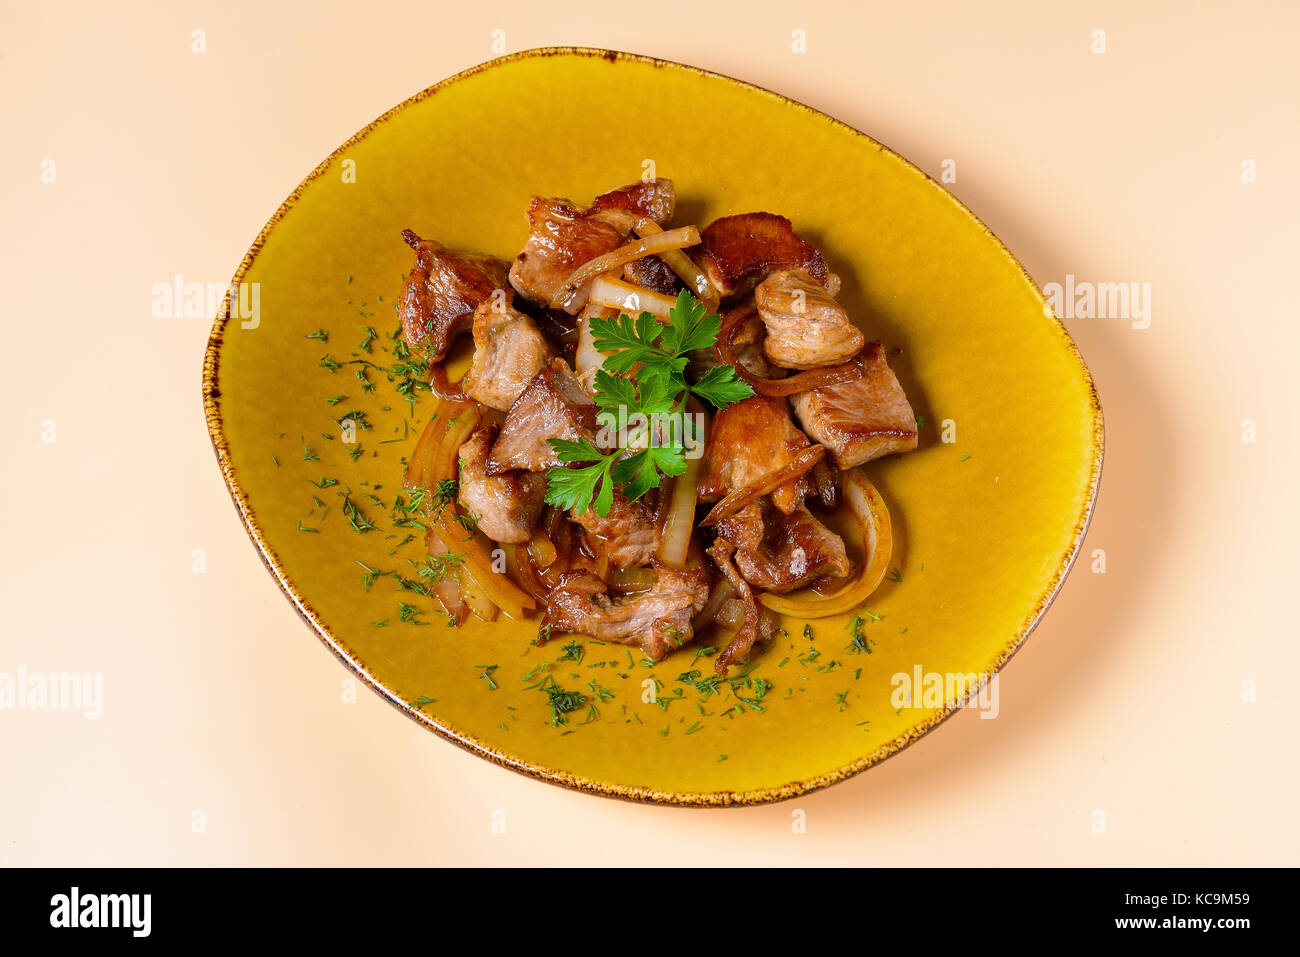 Fried meat with onions on plate Stock Photo